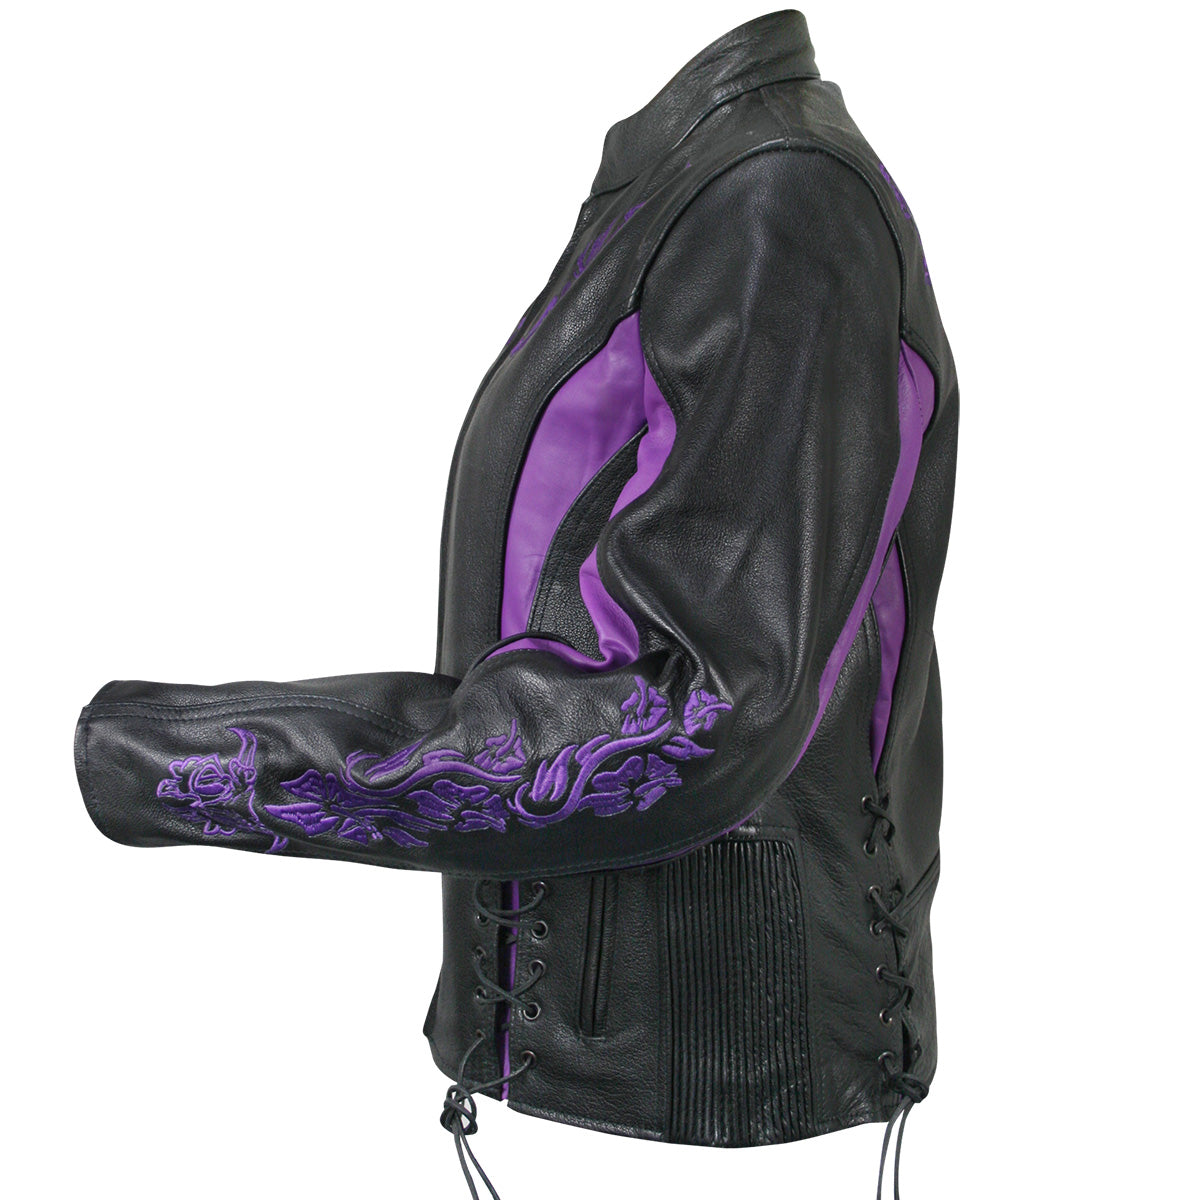 Xelement XS2027 Women's 'Gemma' Biker Black and Purple Leather Embroidered Jacket with X-Armor Protection